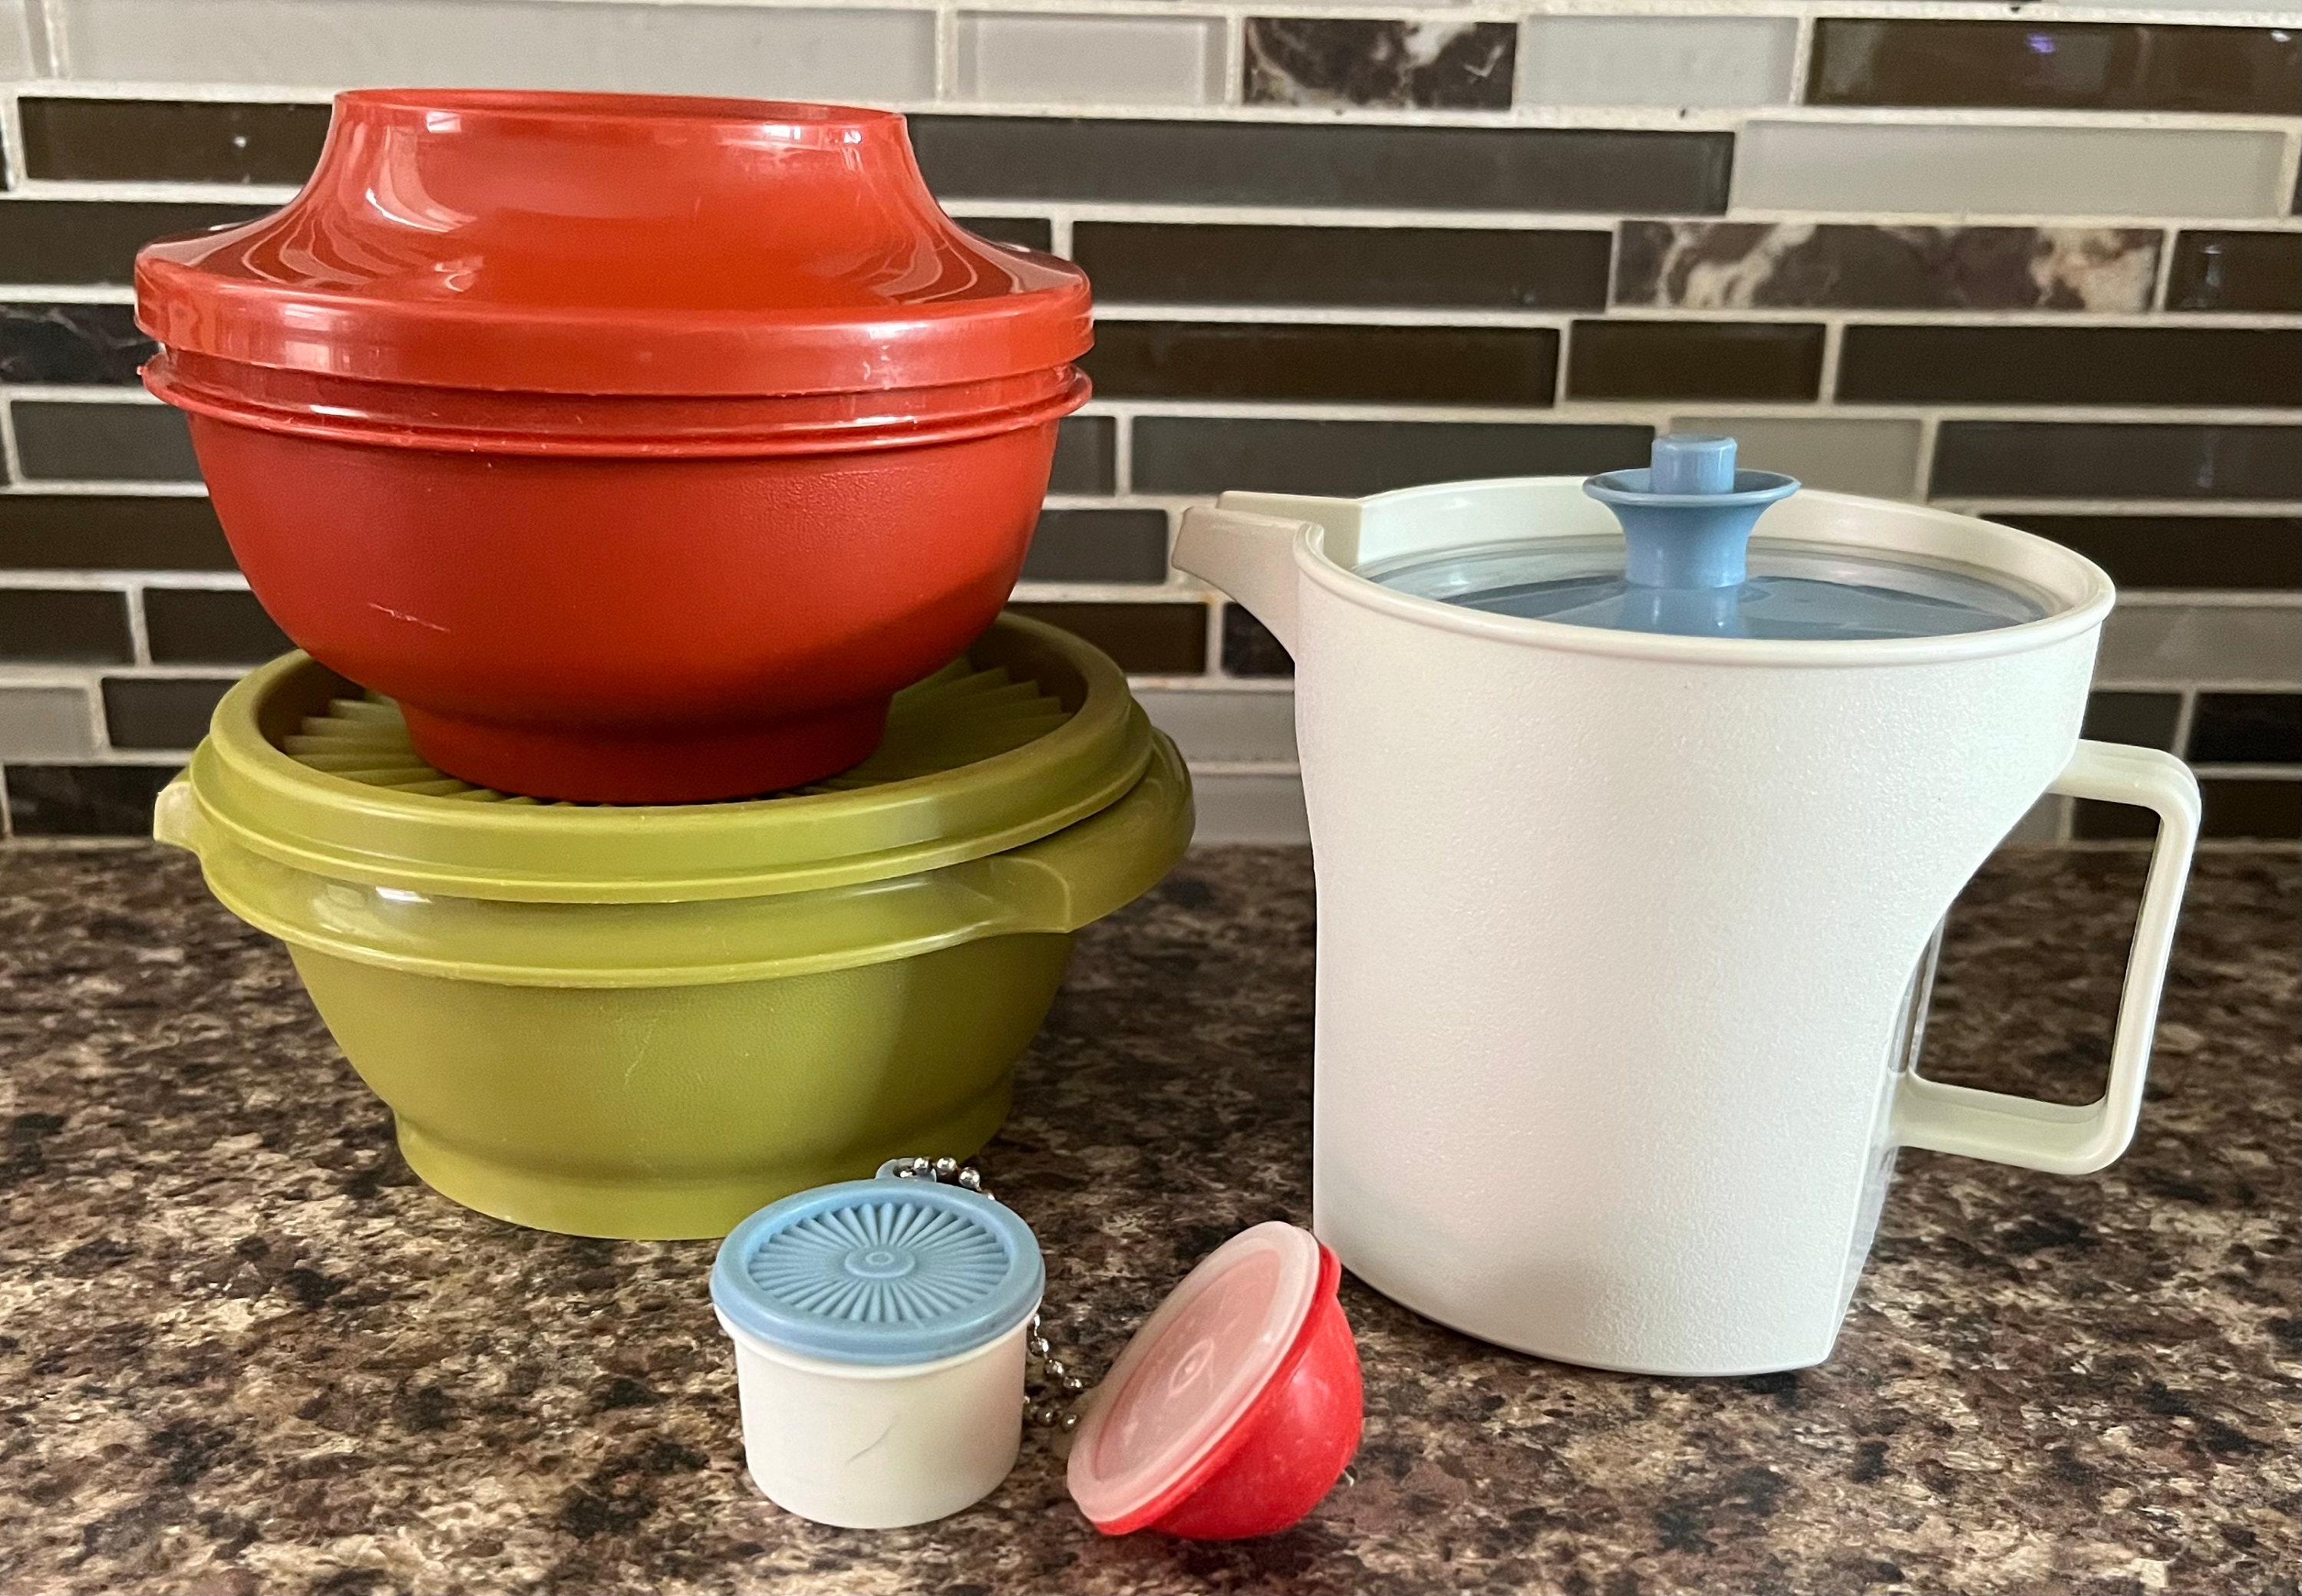 This vintage-inspired Tupperware collection is selling fast on